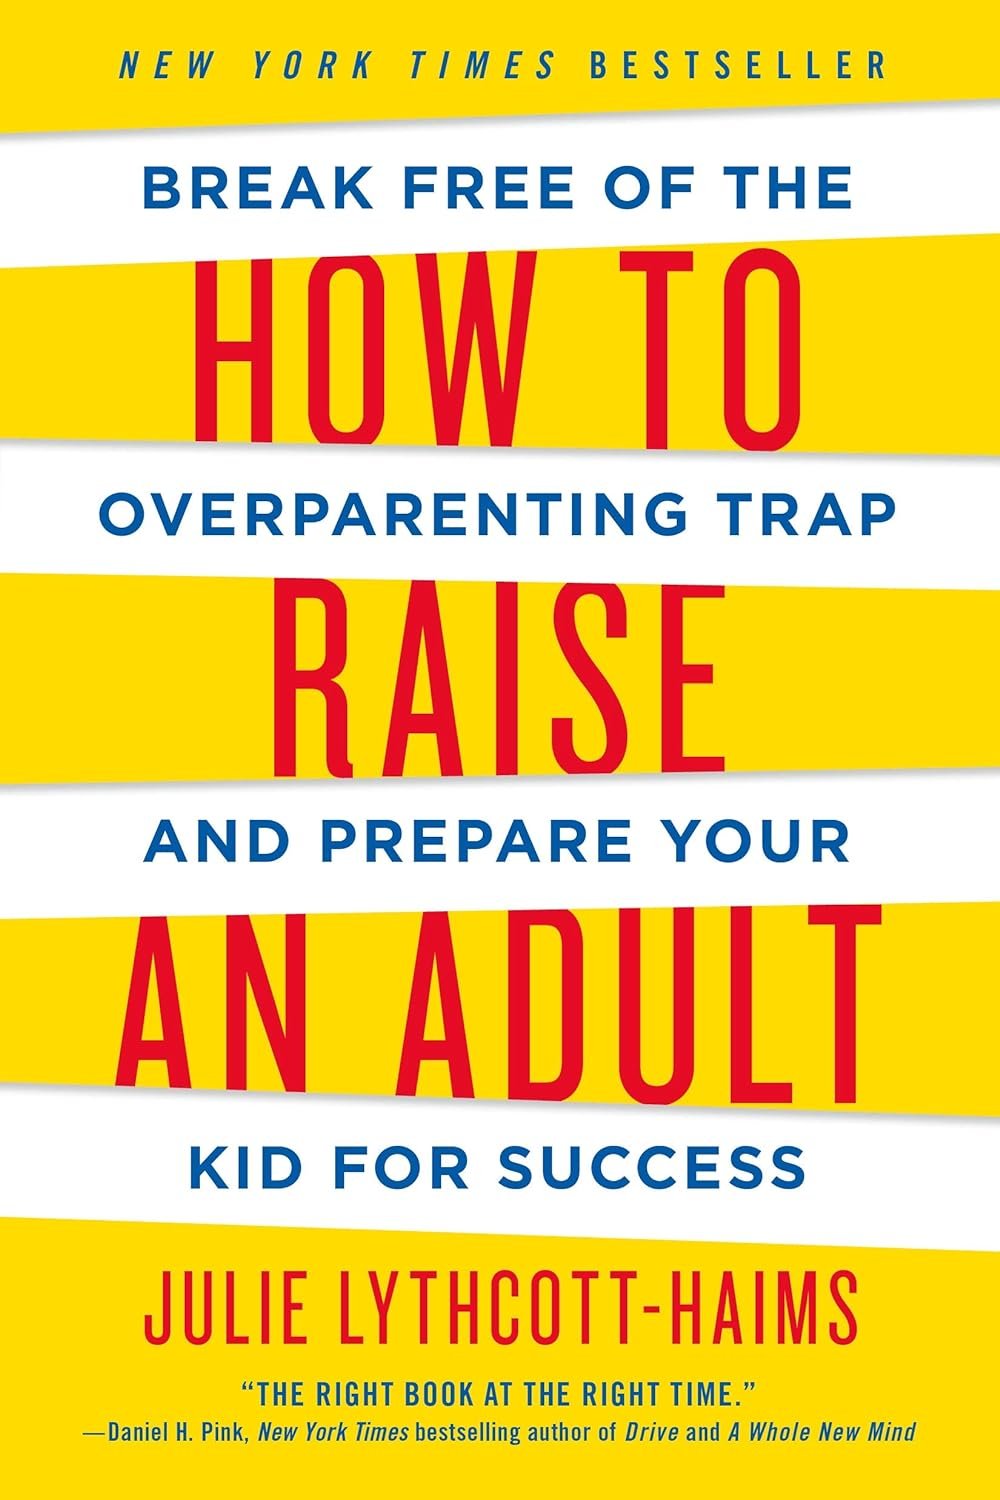 Book cover: How to Raise an Adult by Julie Lythcott-Haims